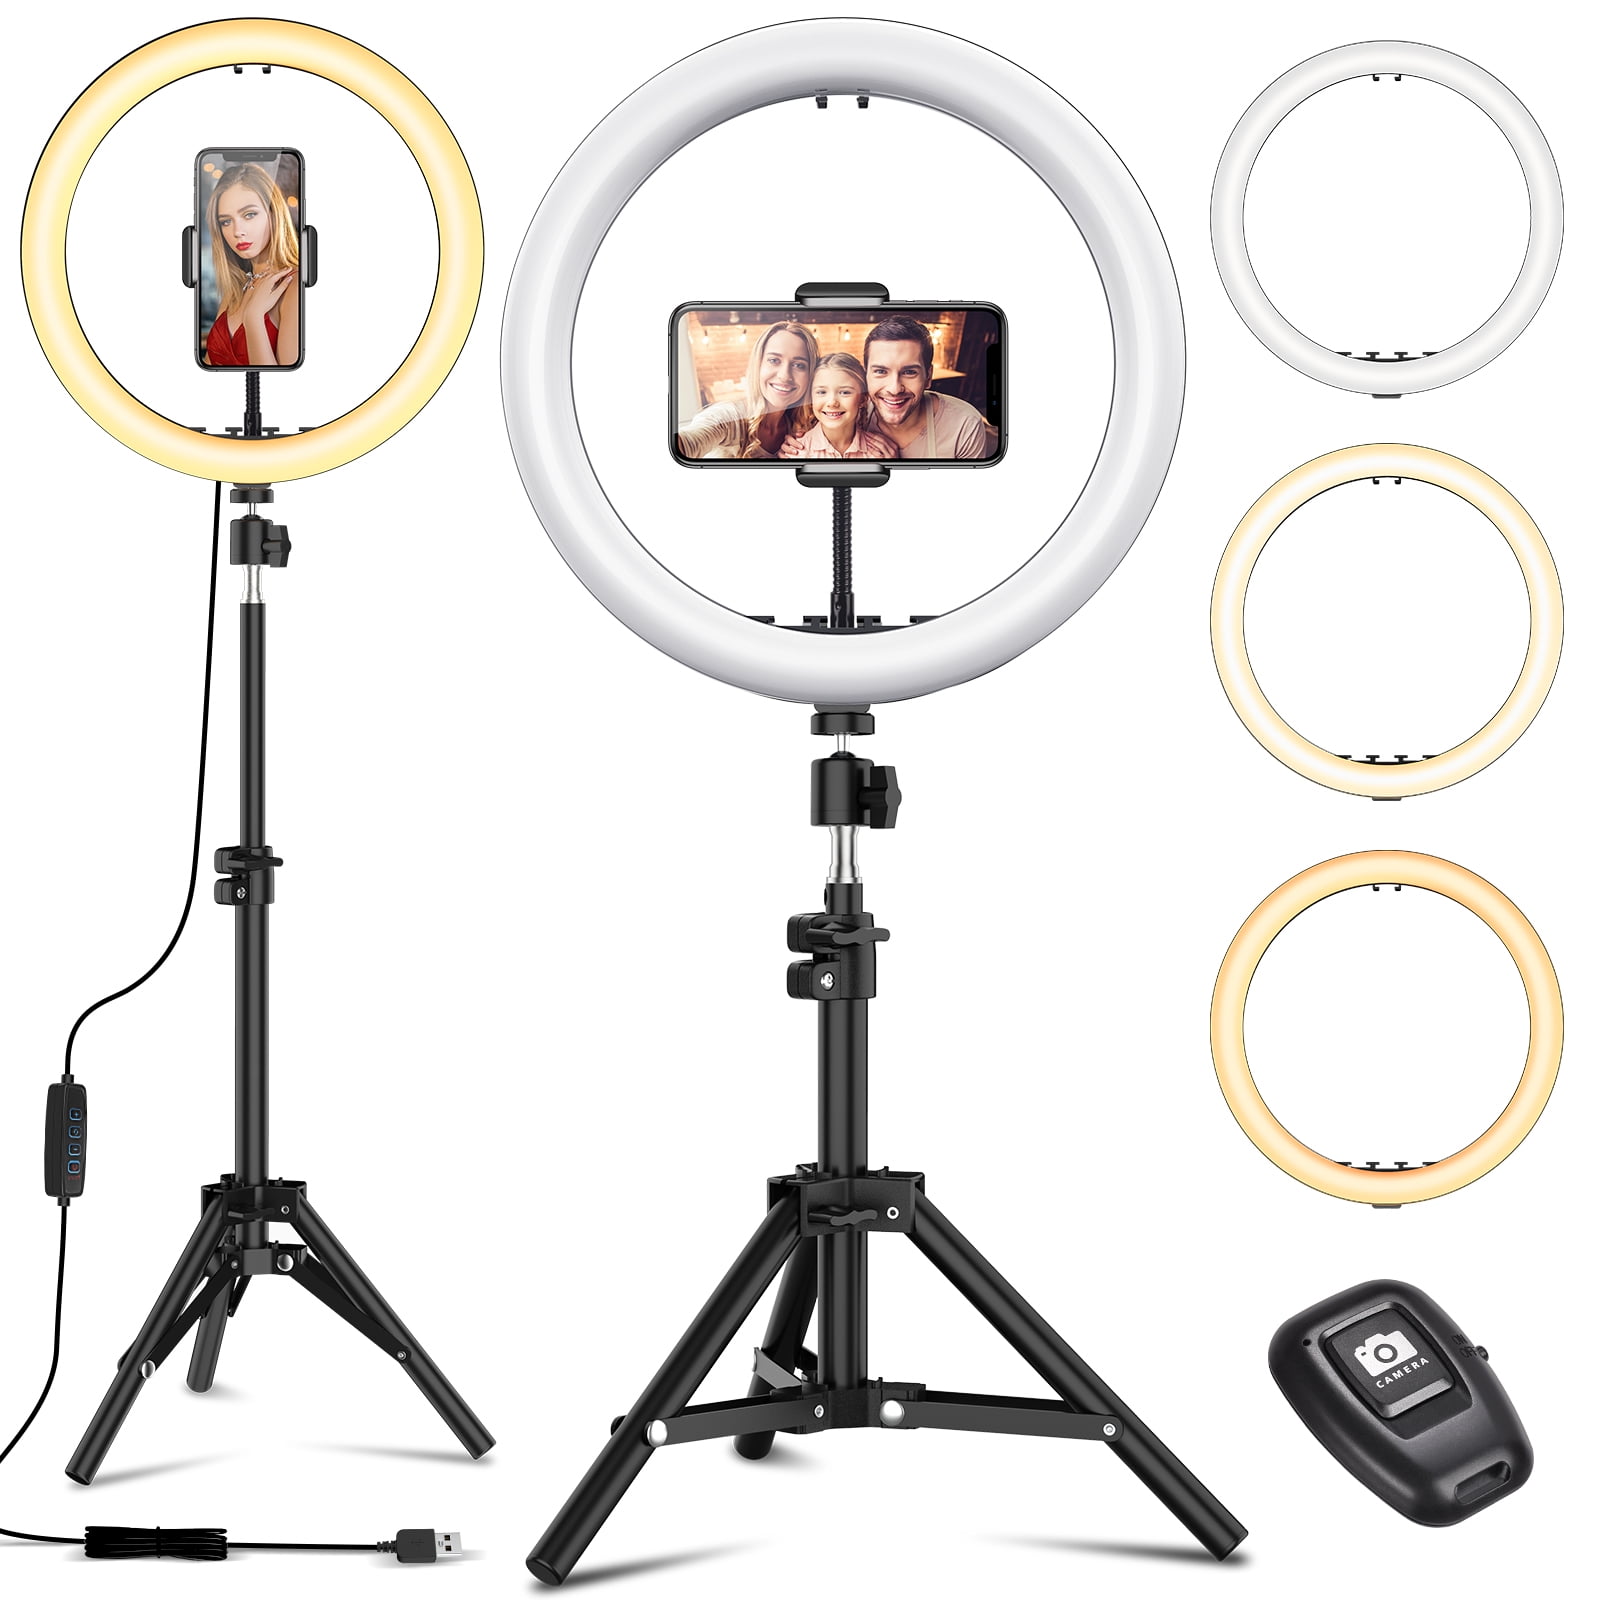 Laptop Light for Video Conference Recording Dimmable LED Selfie Ring Lights with Tripod Stand and Phone Holder for Zoom Meetings Makeup Live Streaming YouTube Vlogging Selfie Photography Computer 